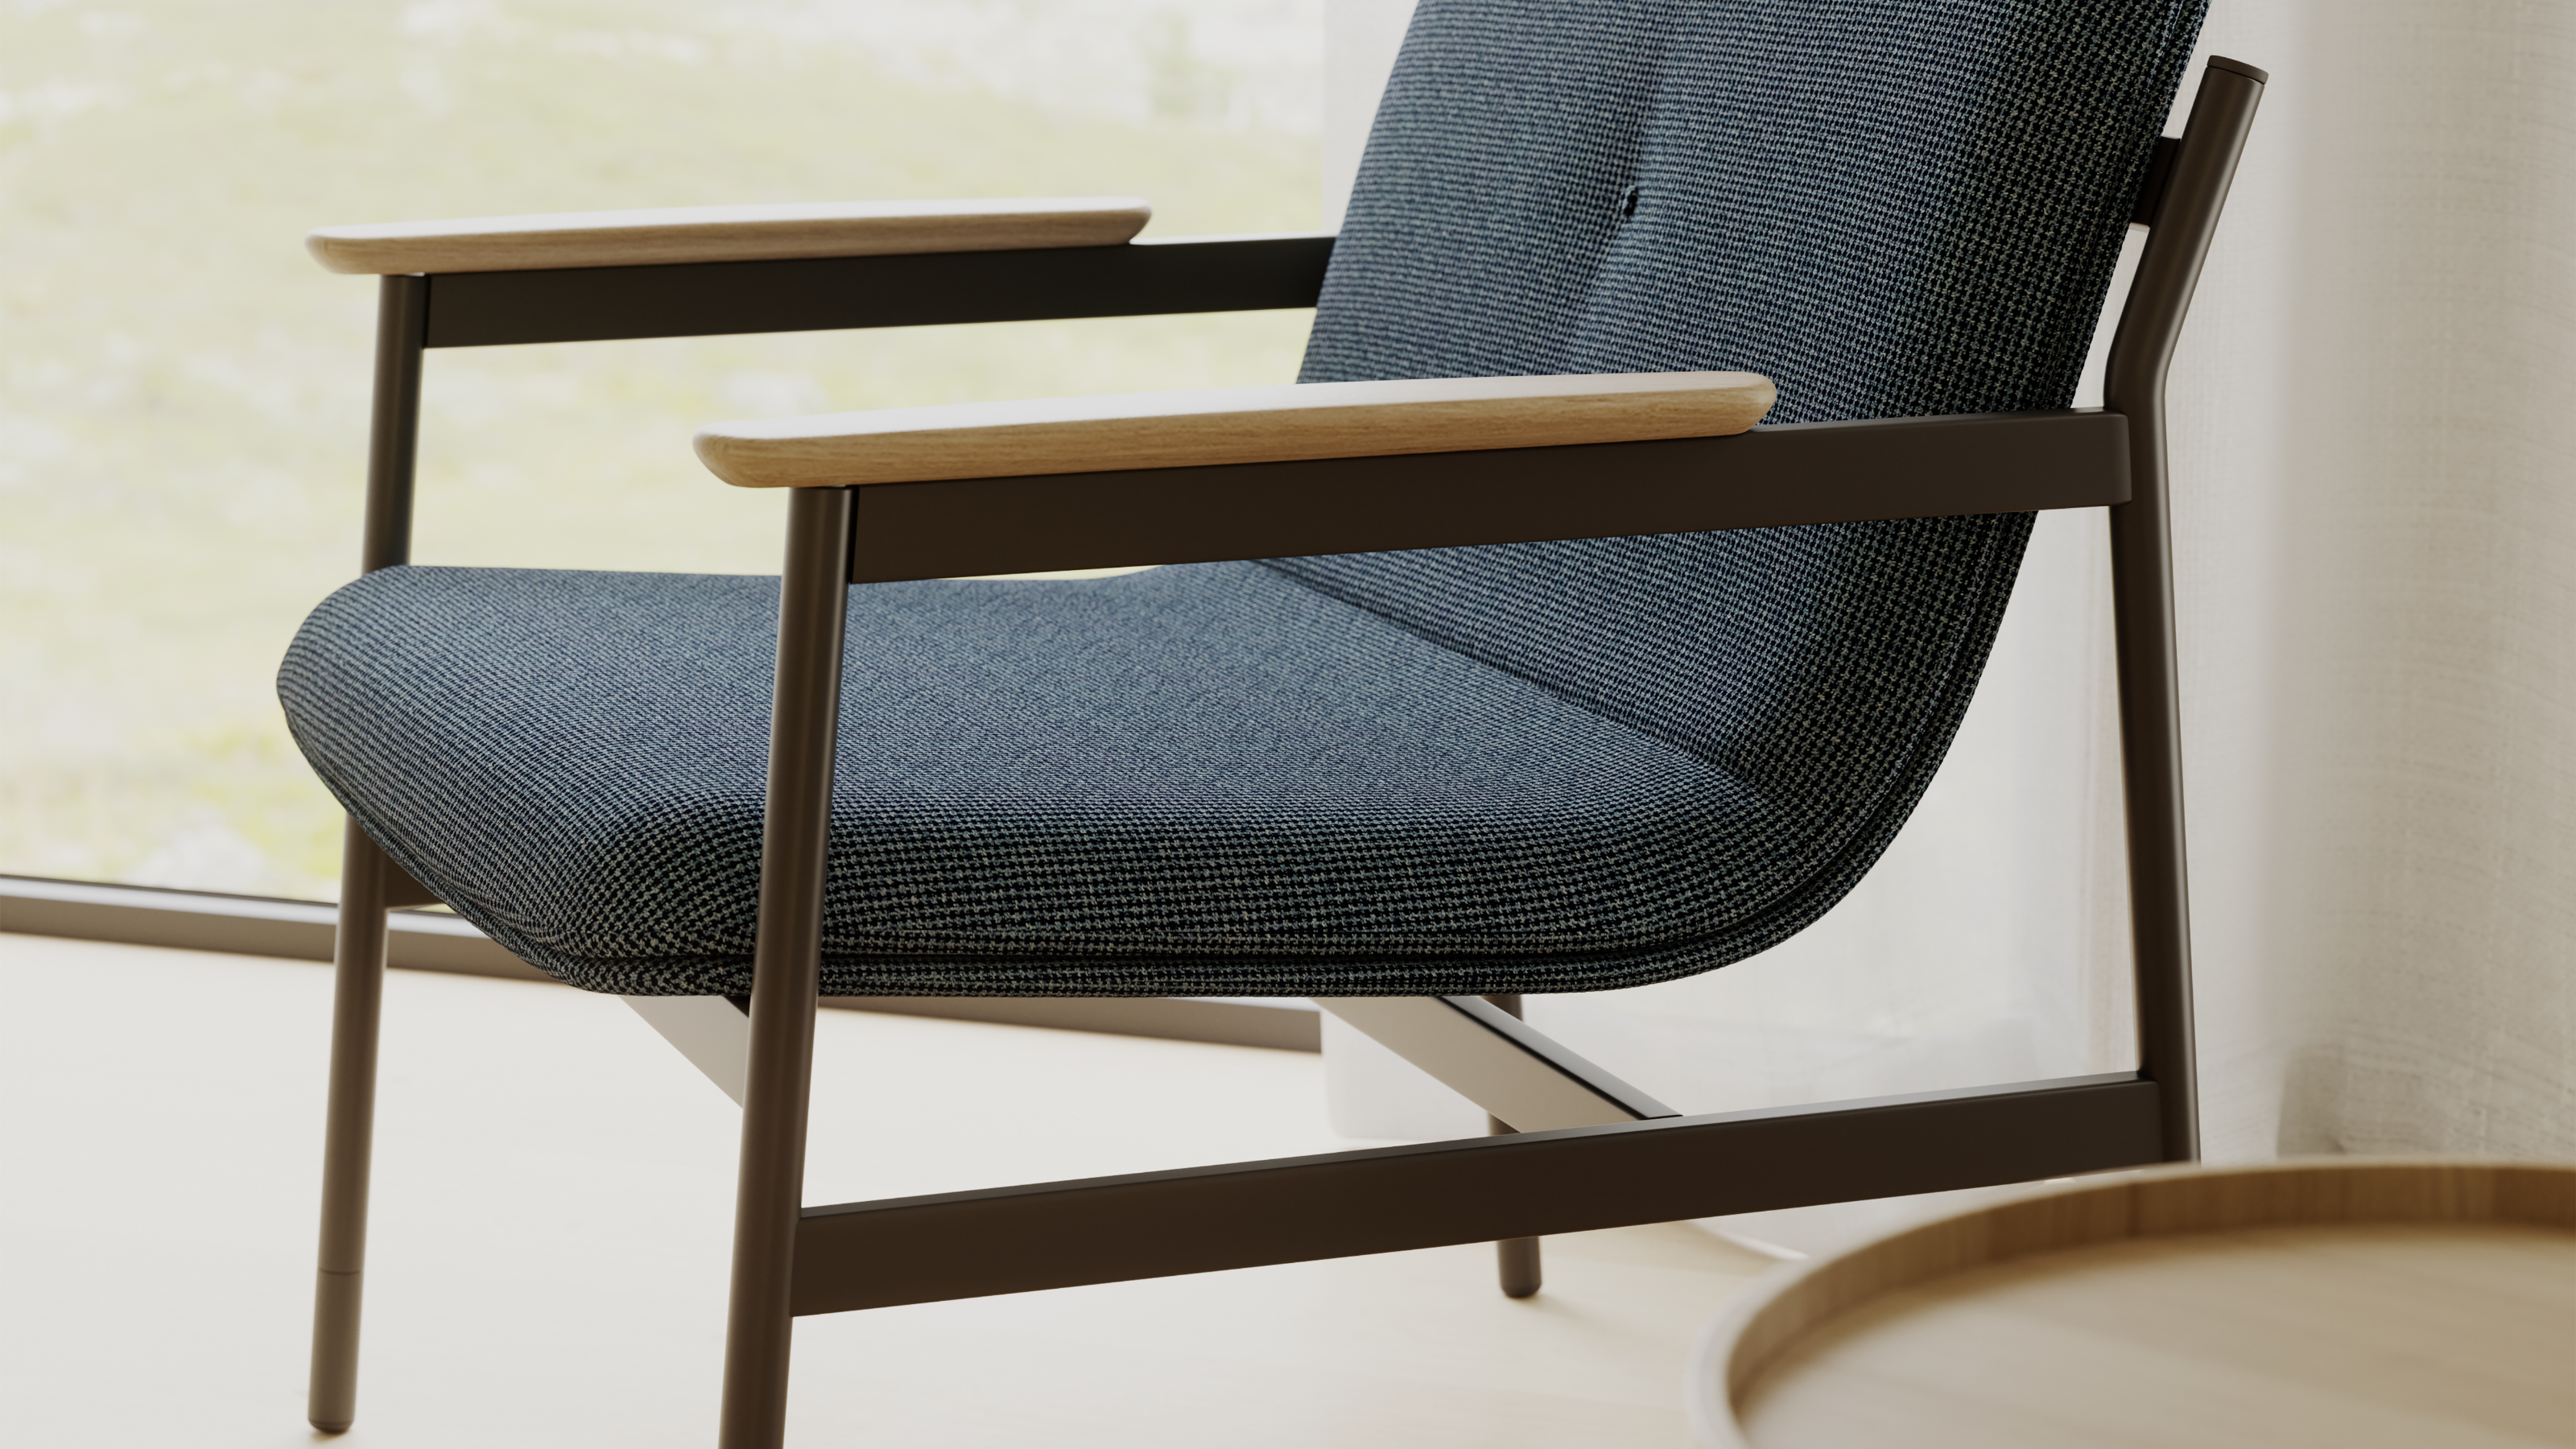 Brighton Lounge Chair, One-seat Upholstery: Boucle Houndstooth Pacific Arm cap: VP01 Oak Light